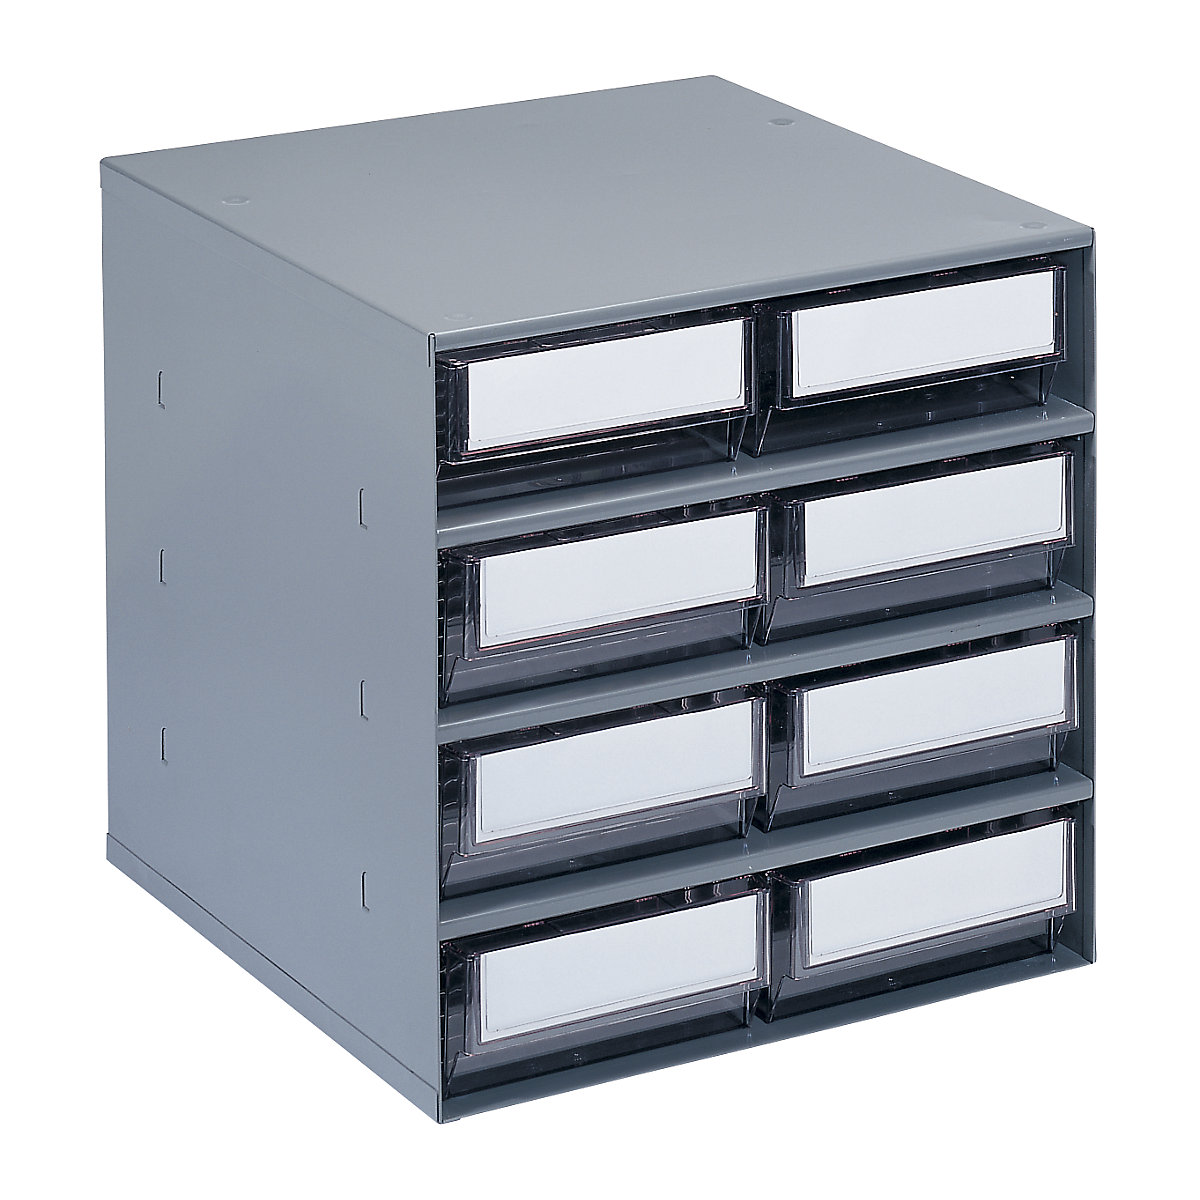 Drawer cabinet, max. housing load 75 kg, HxWxD 395 x 376 x 400 mm, 8 drawers, transparent drawers-5